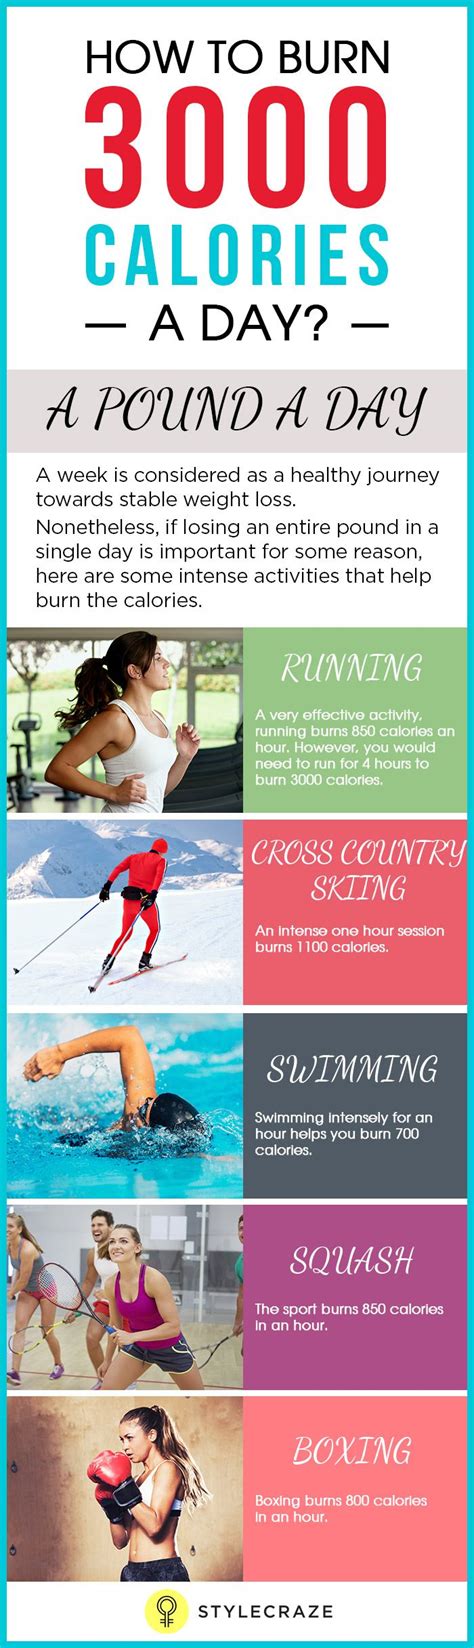 Is it possible to burn 3000 calories a day?